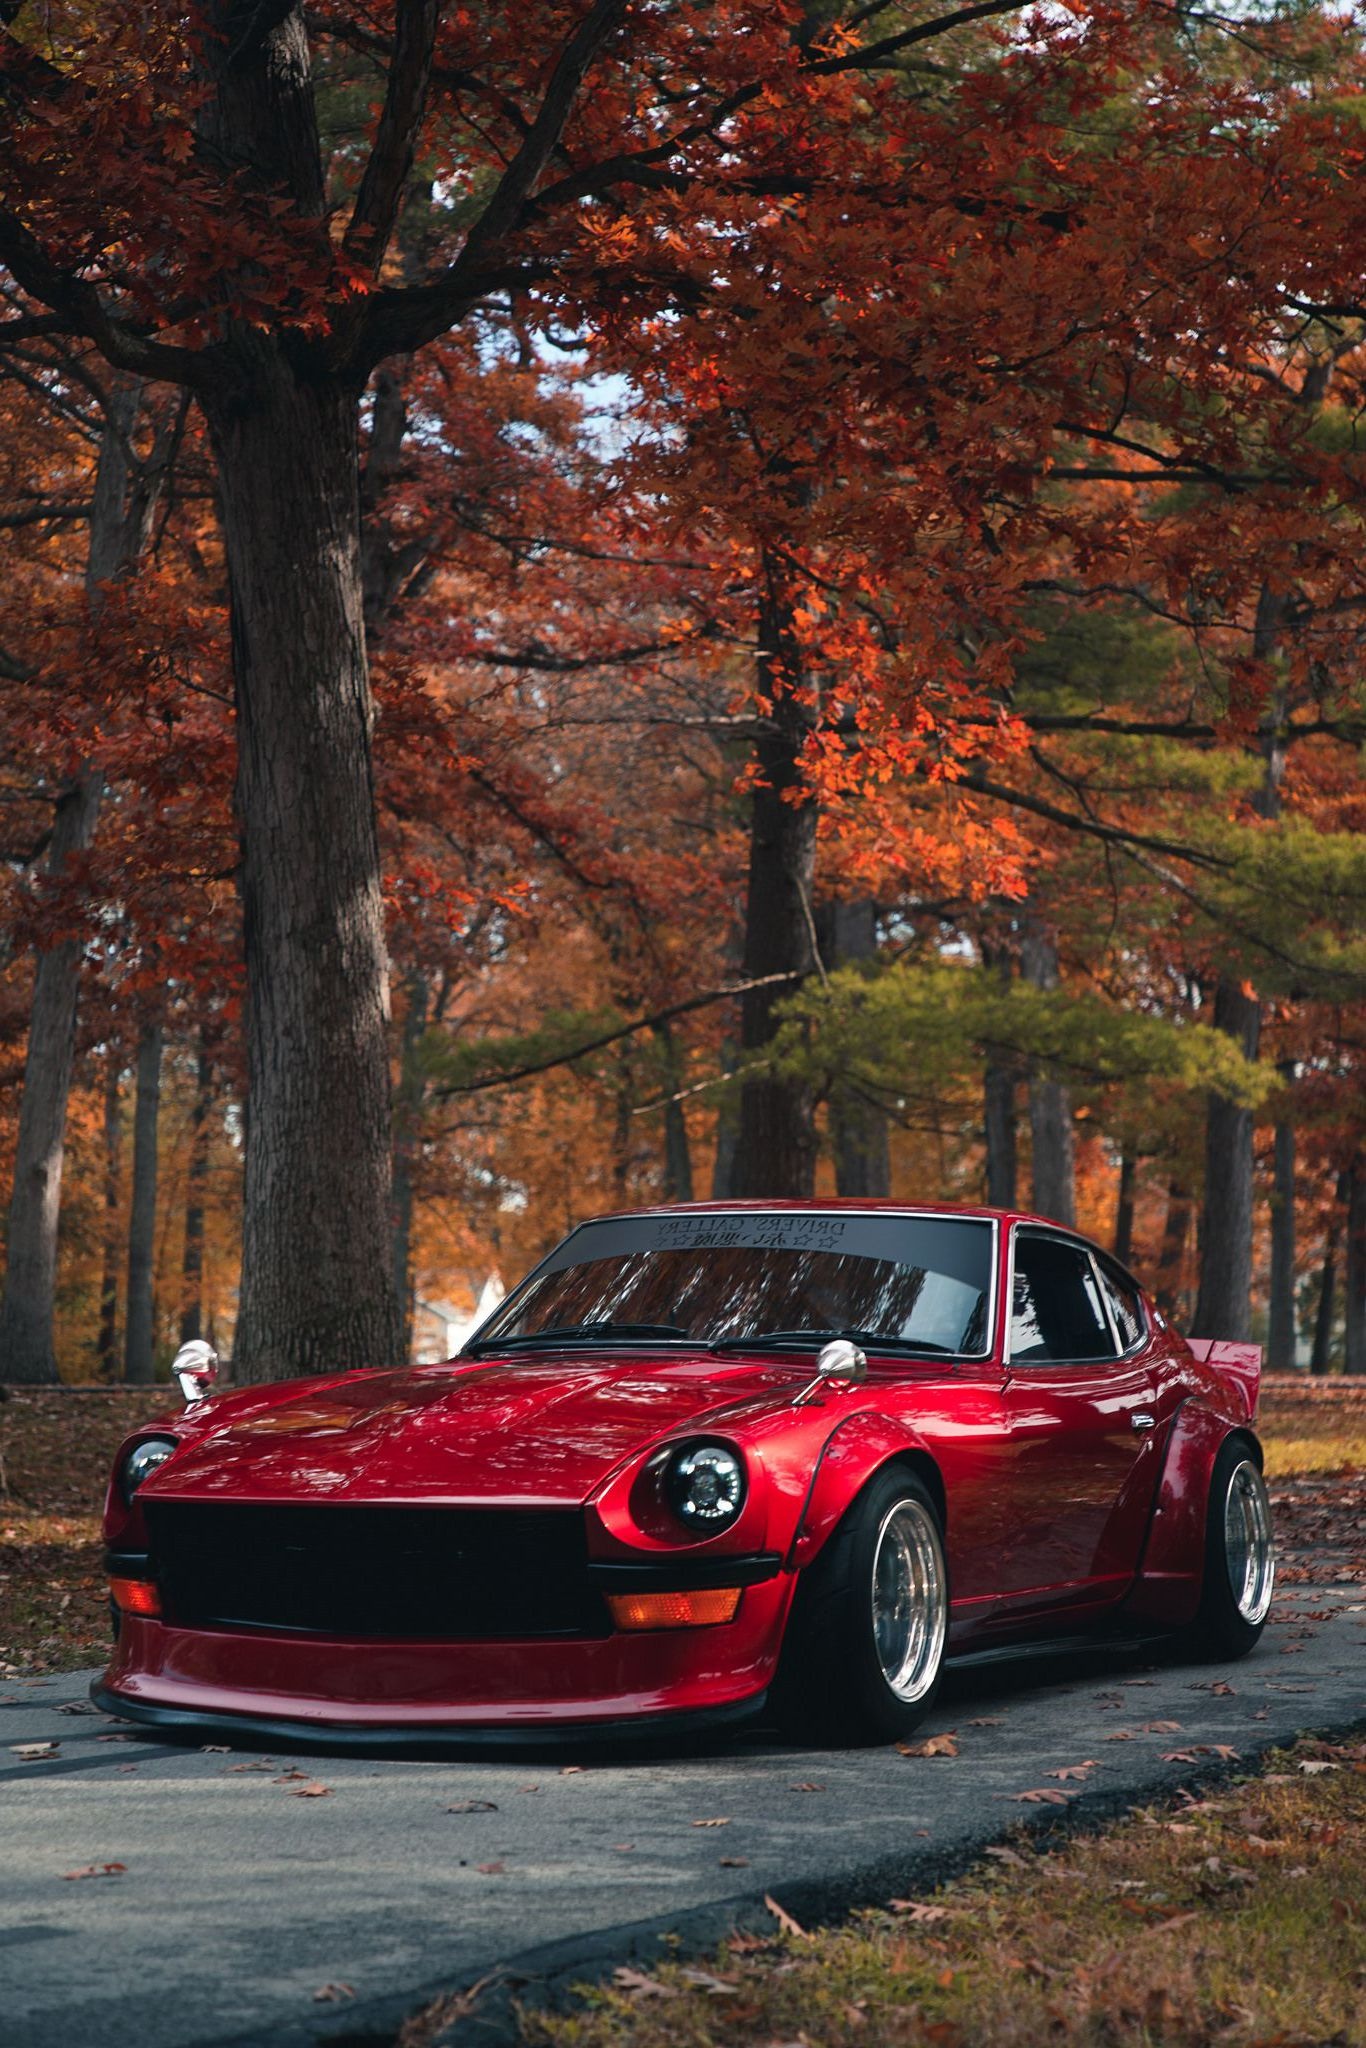 Datsun 280z wallpaper by Michelle Sellers, Customized beauty, Wallpaper perfection, Automotive passion, 1370x2050 HD Handy